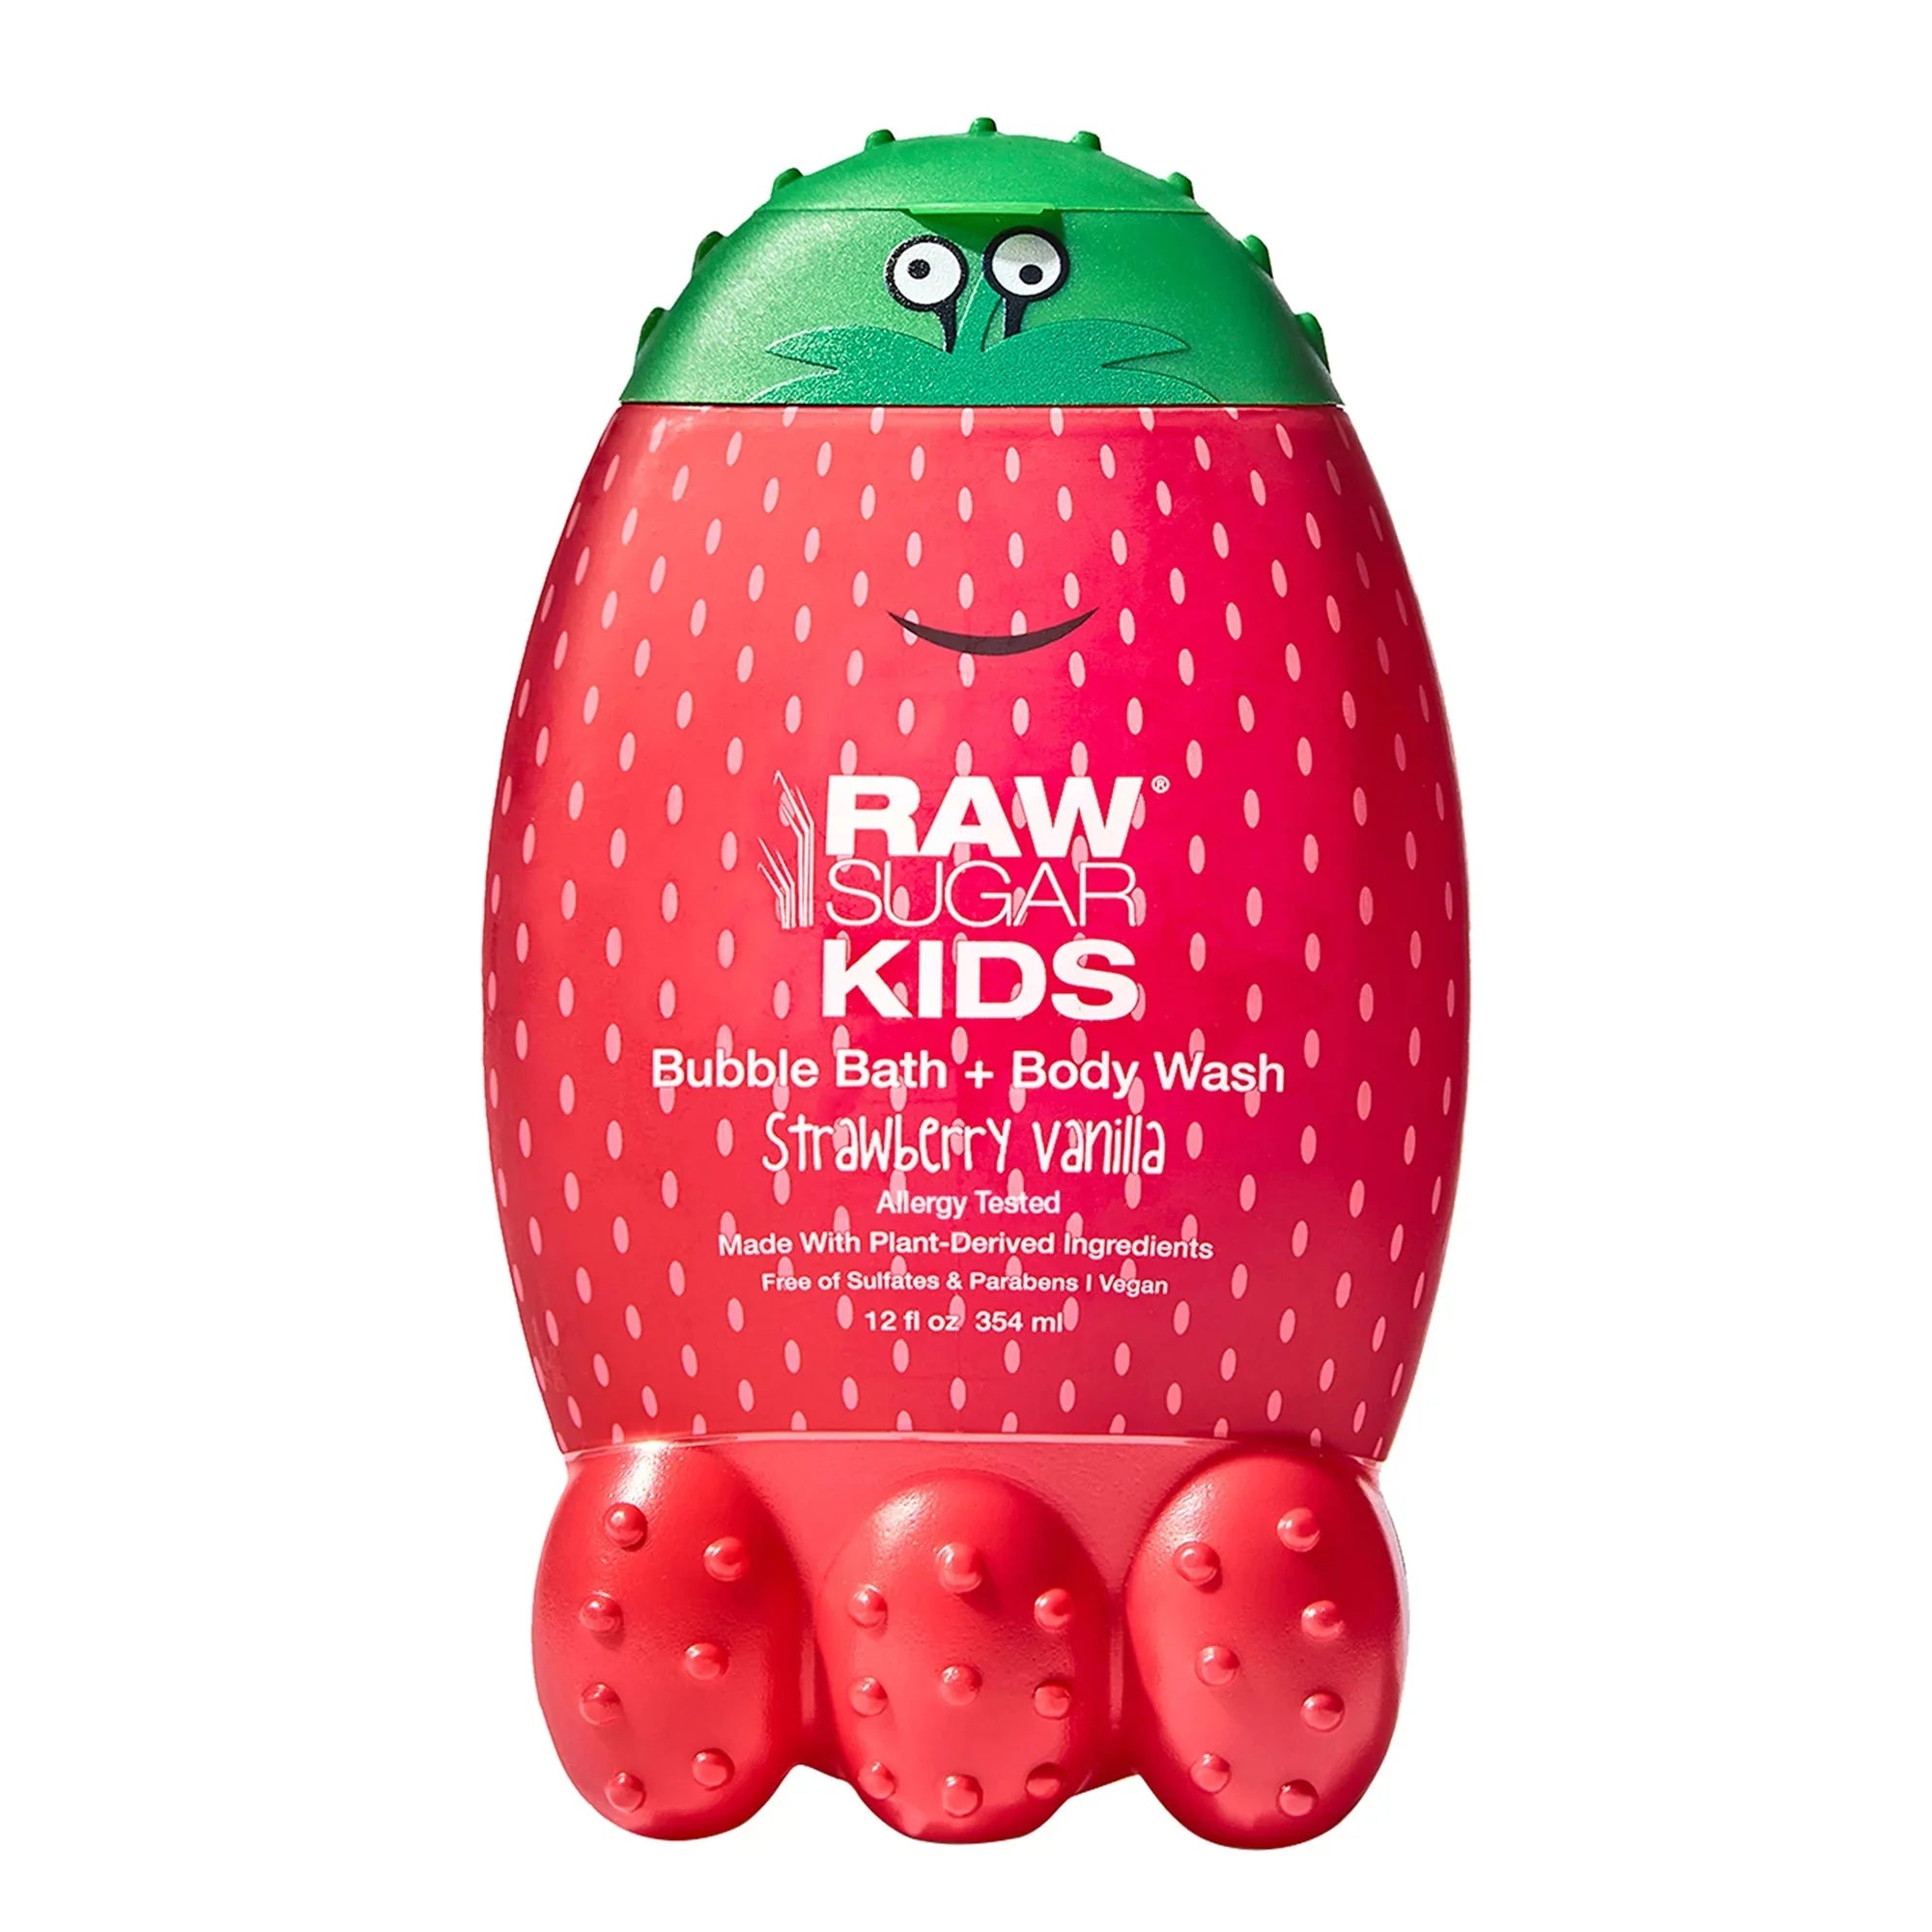 Wholesale prices with free shipping all over United States Raw Sugar Kids 2-in-1 Bubble Bath and Body Wash, Strawberry Vanilla, 12 fl oz - Steven Deals